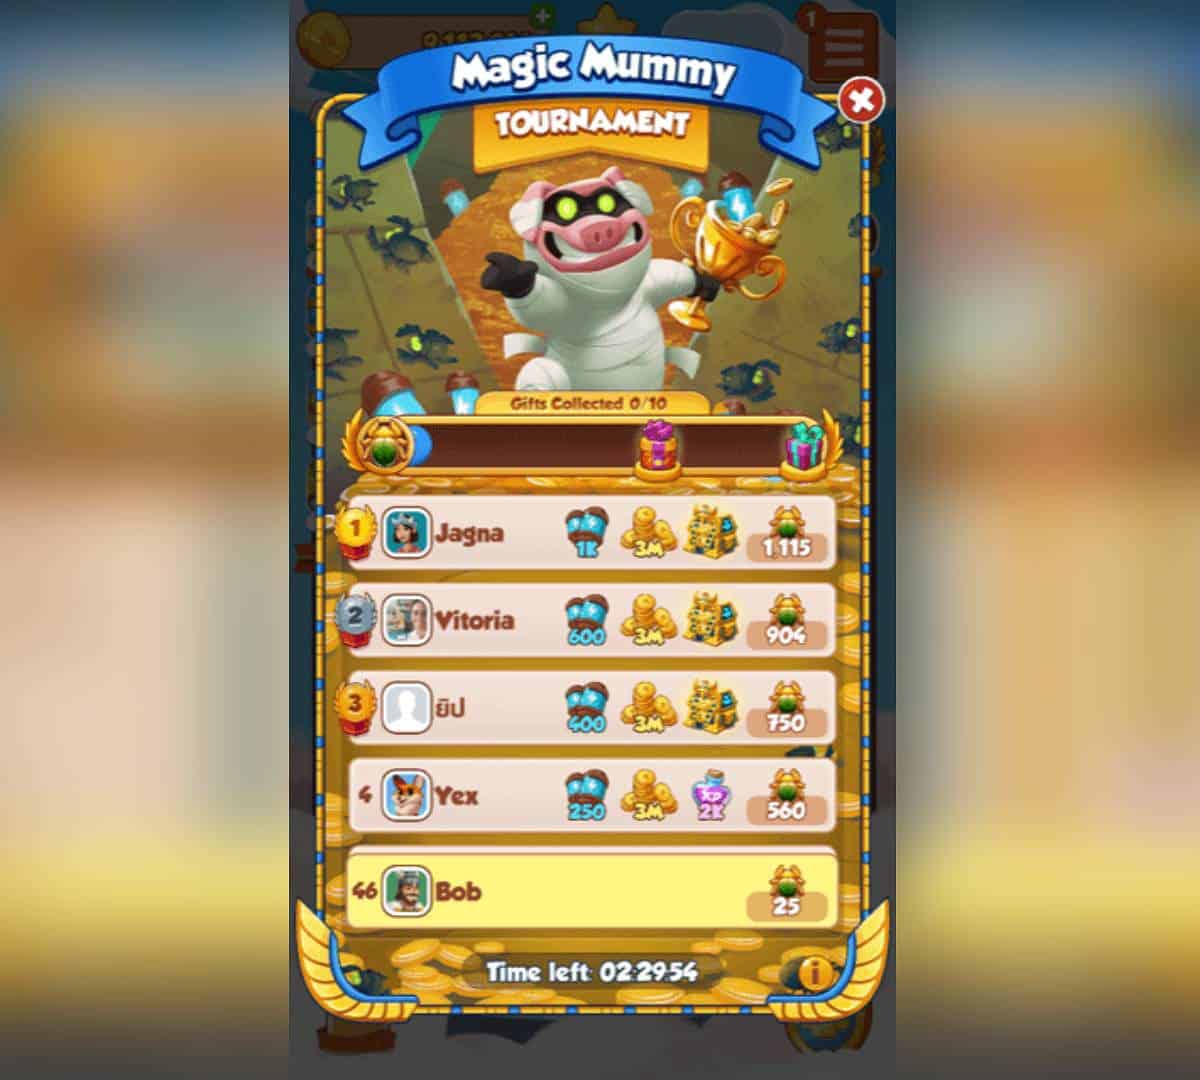 Coin Master free spins and coins links: The leaderboard for the Magic Mummy tournament within Coin Master.